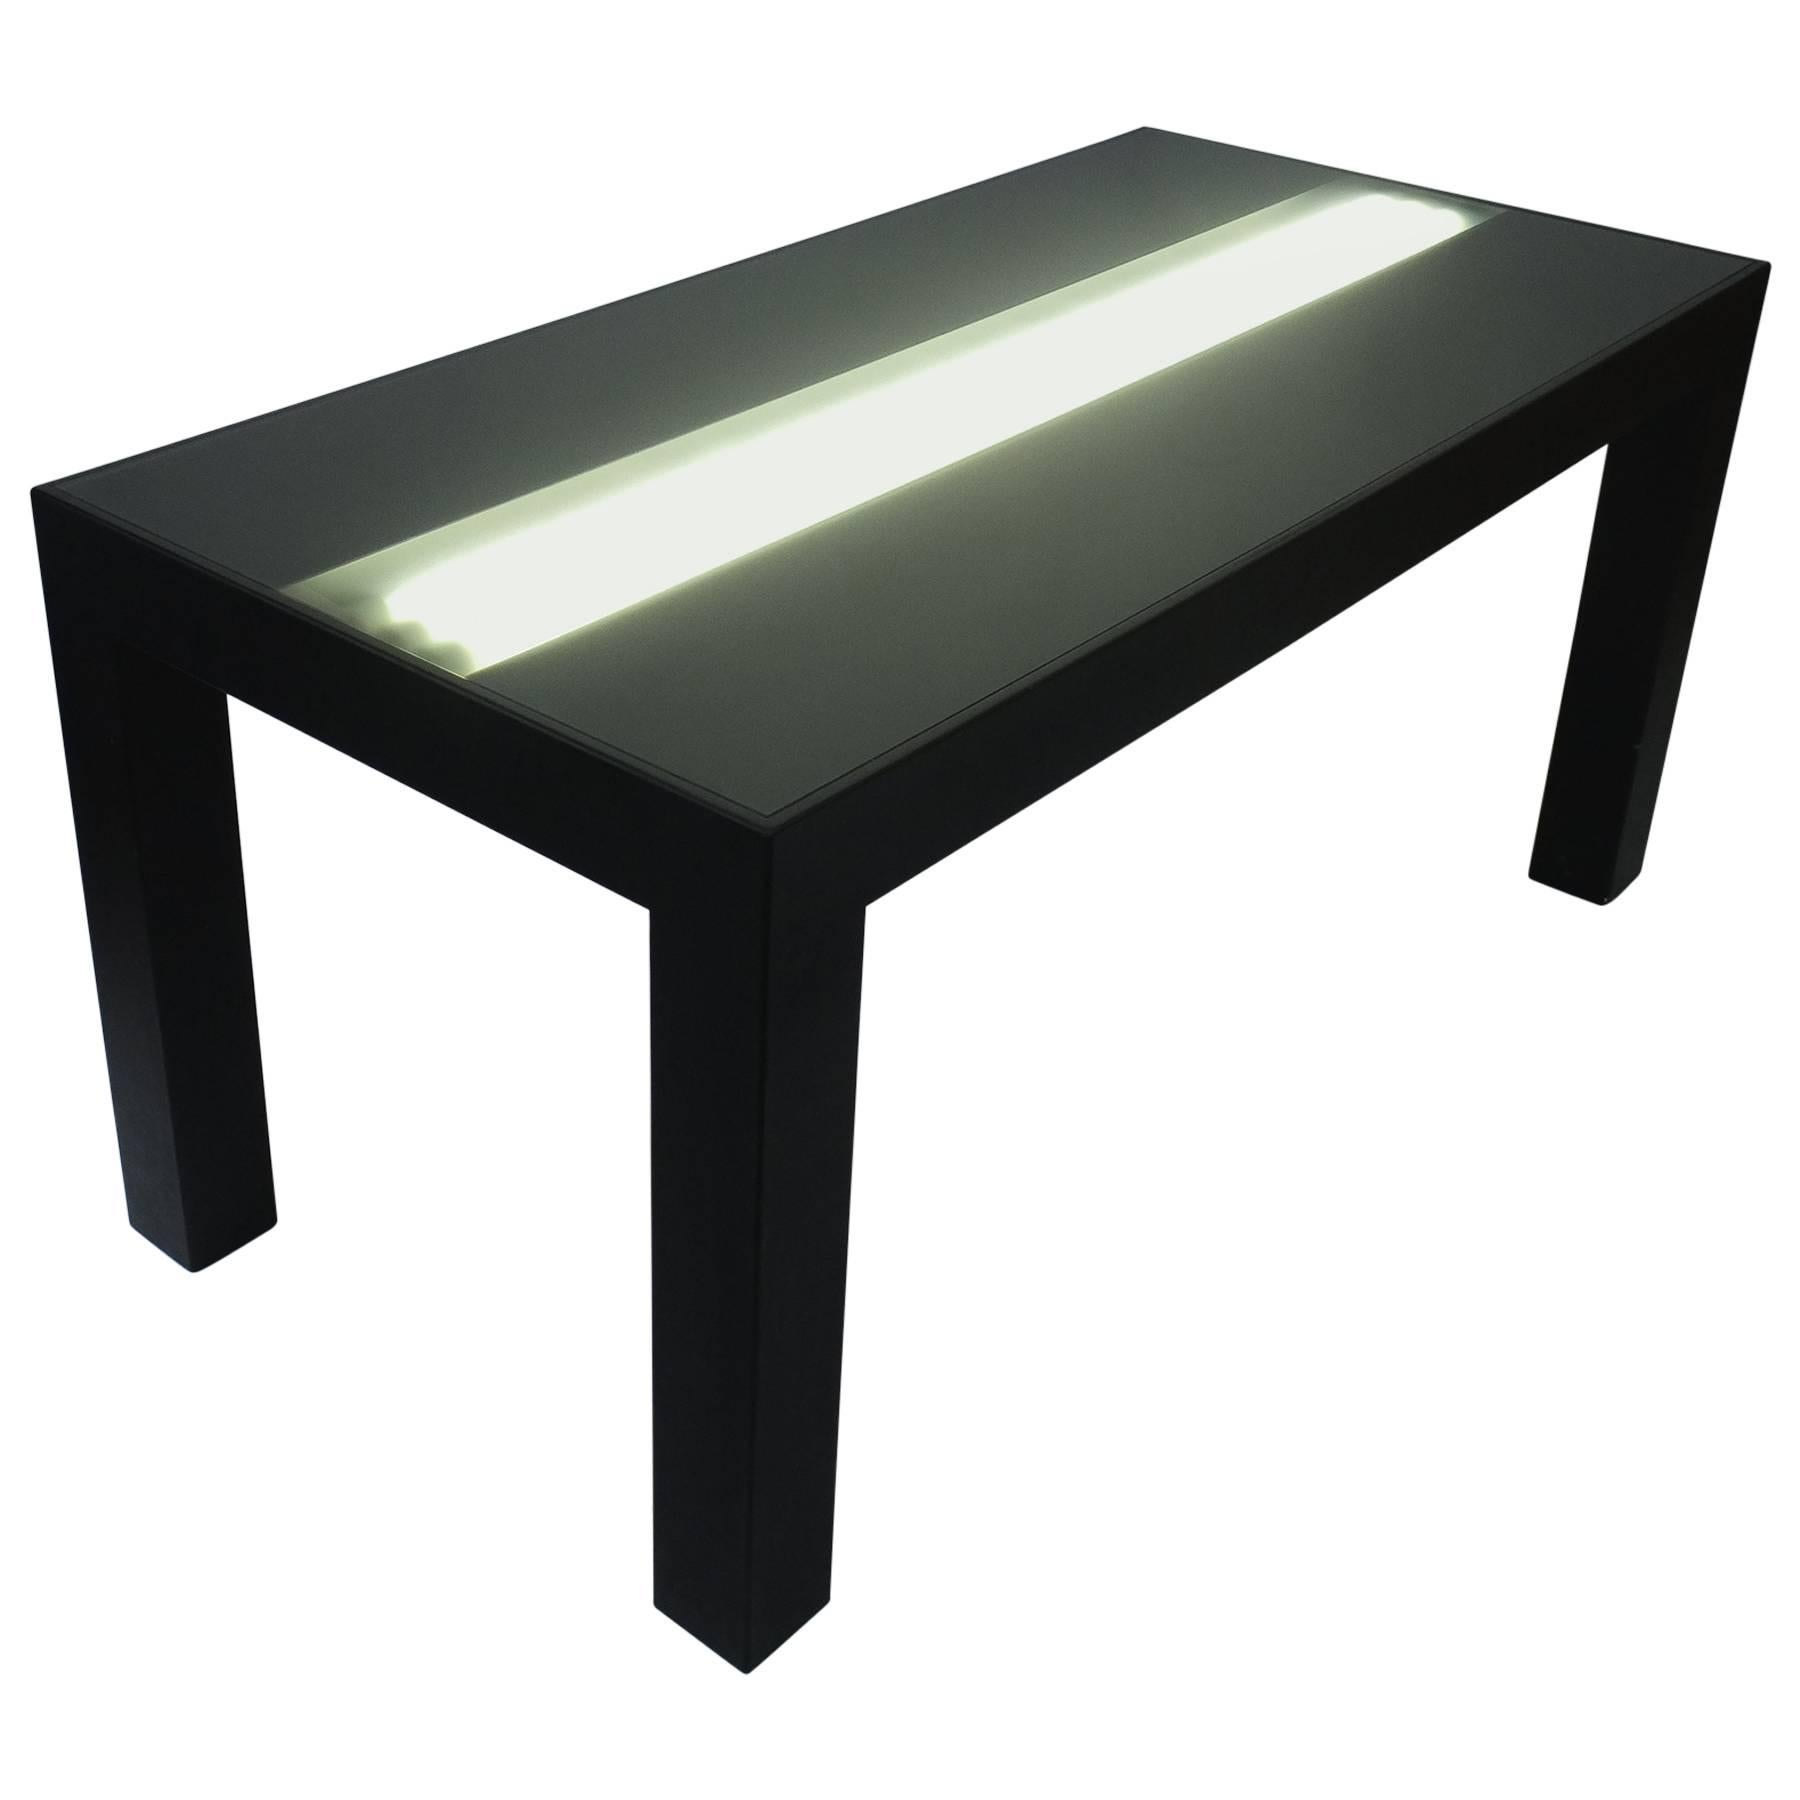 Johanna Grawunder Illuminated Dining Table by  for Post-Design, 2001 For Sale